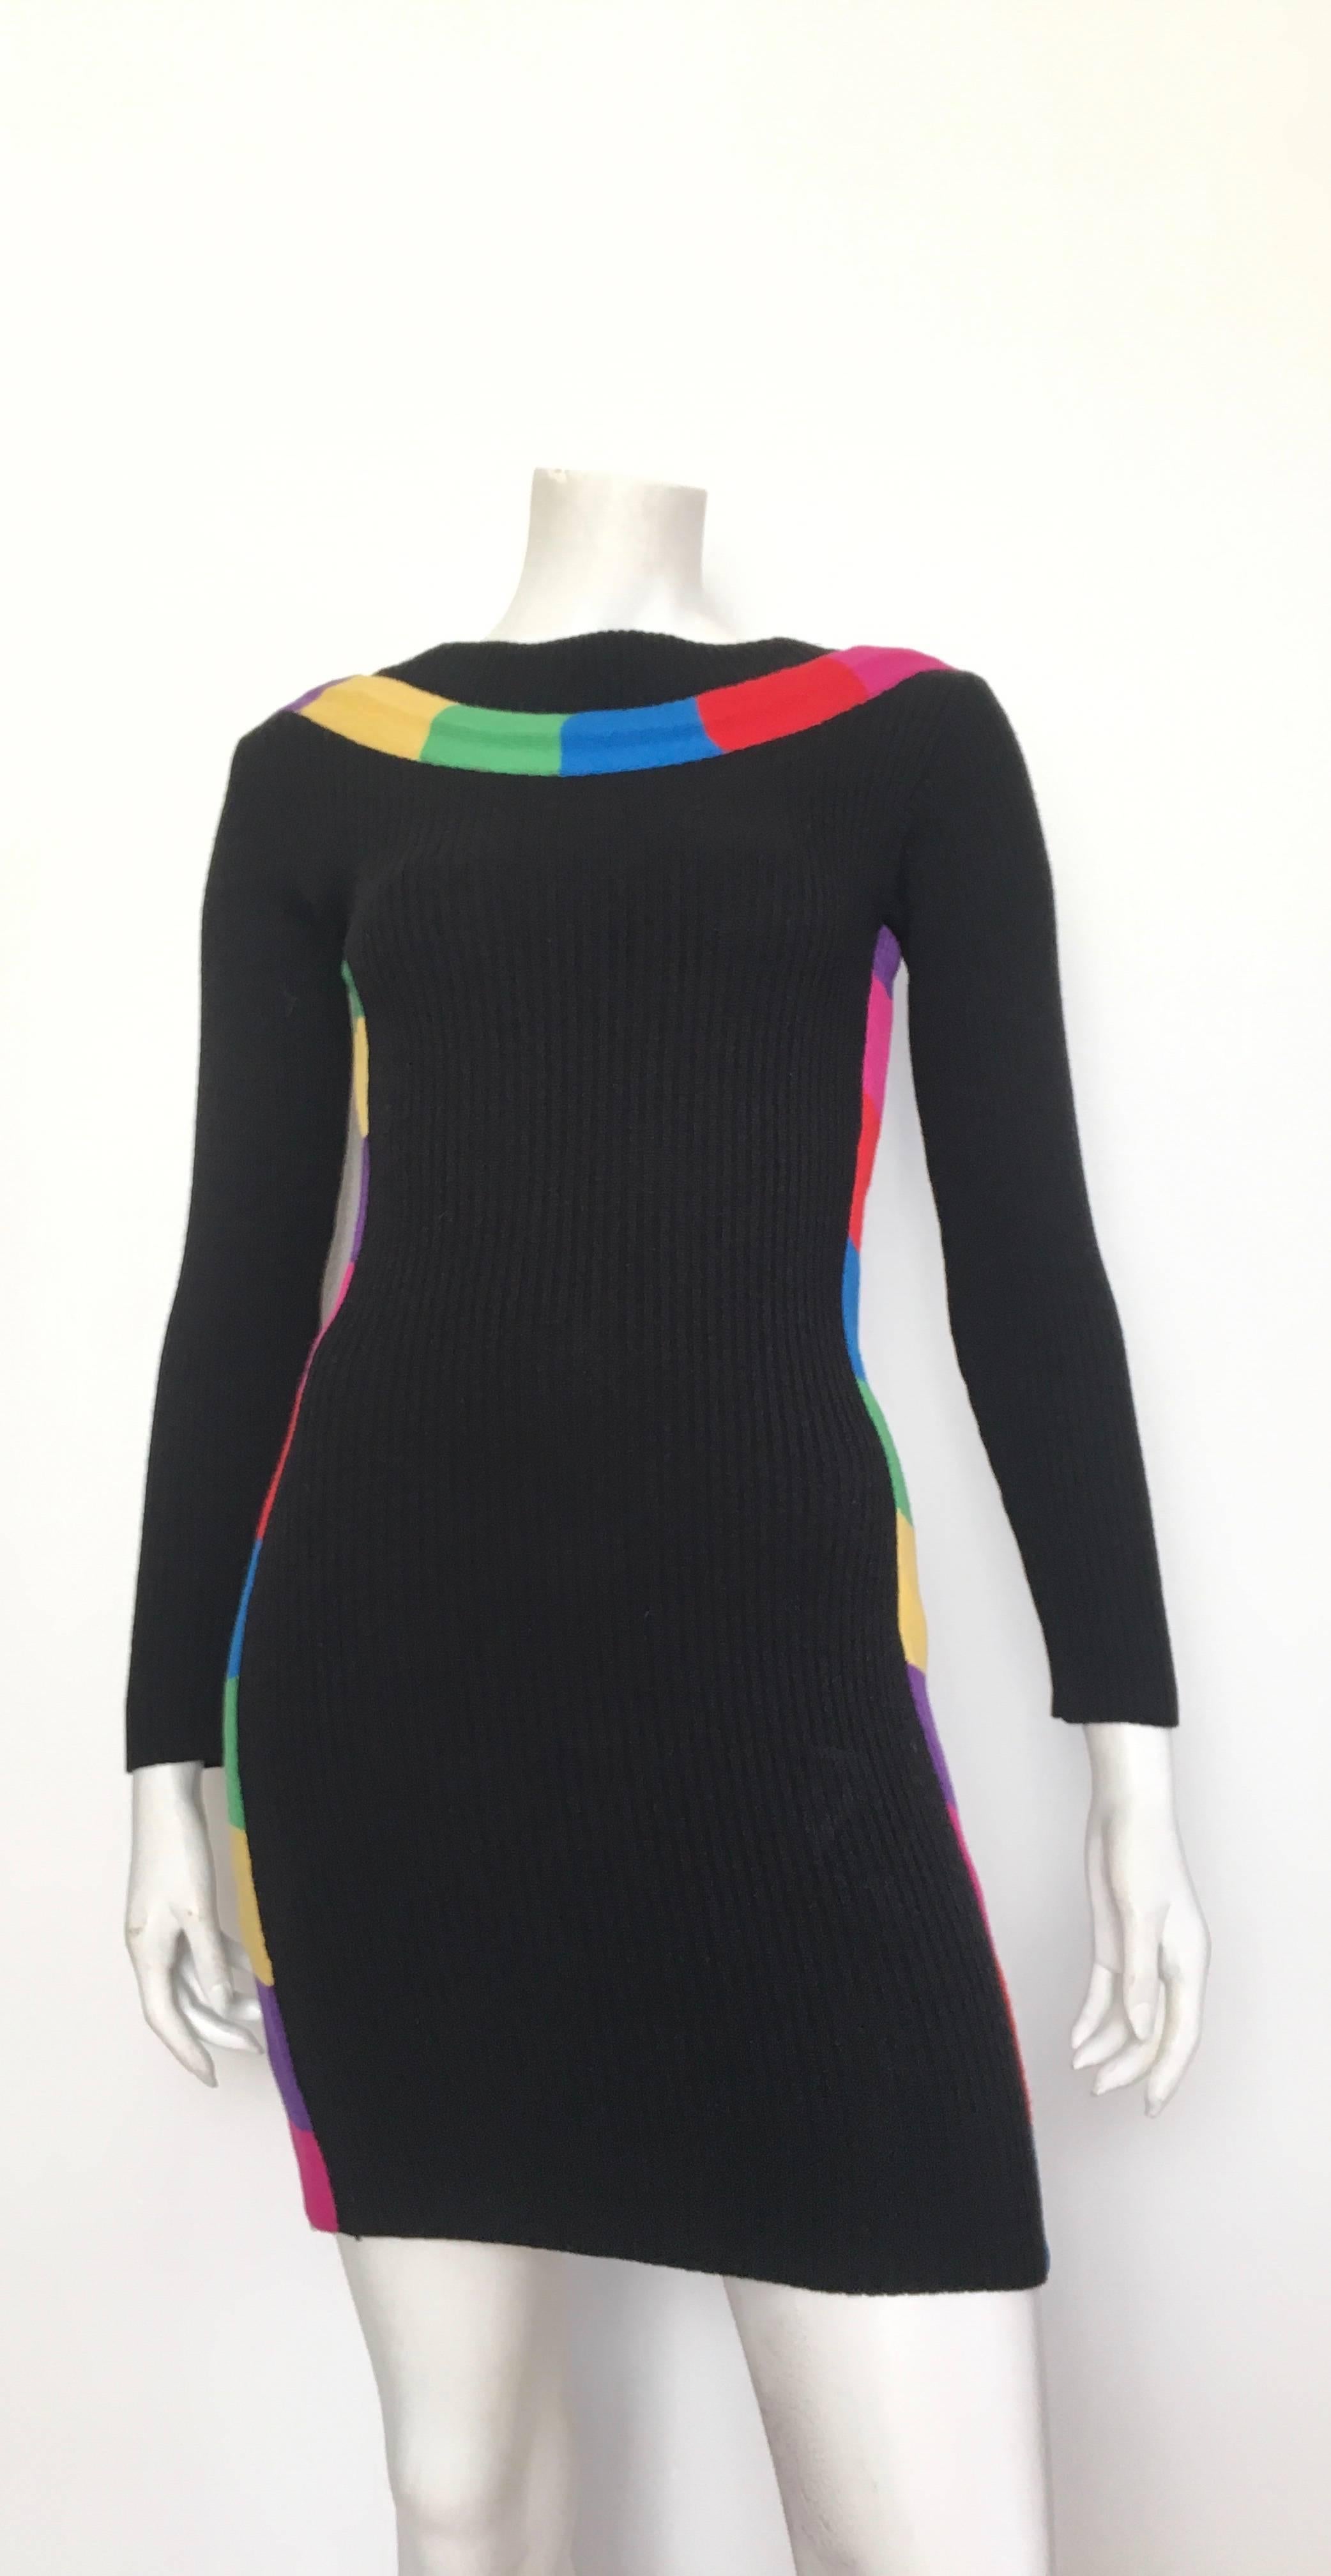 Patrick Kelly Paris late 1980s black wool knit 'rainbow' sexy mini dress will fit an USA size 4. If you have the body type of Matilda the Mannequin, which is a size 4, then this gorgeous rare dress is for you.  Patrick Kelly gave this to model and